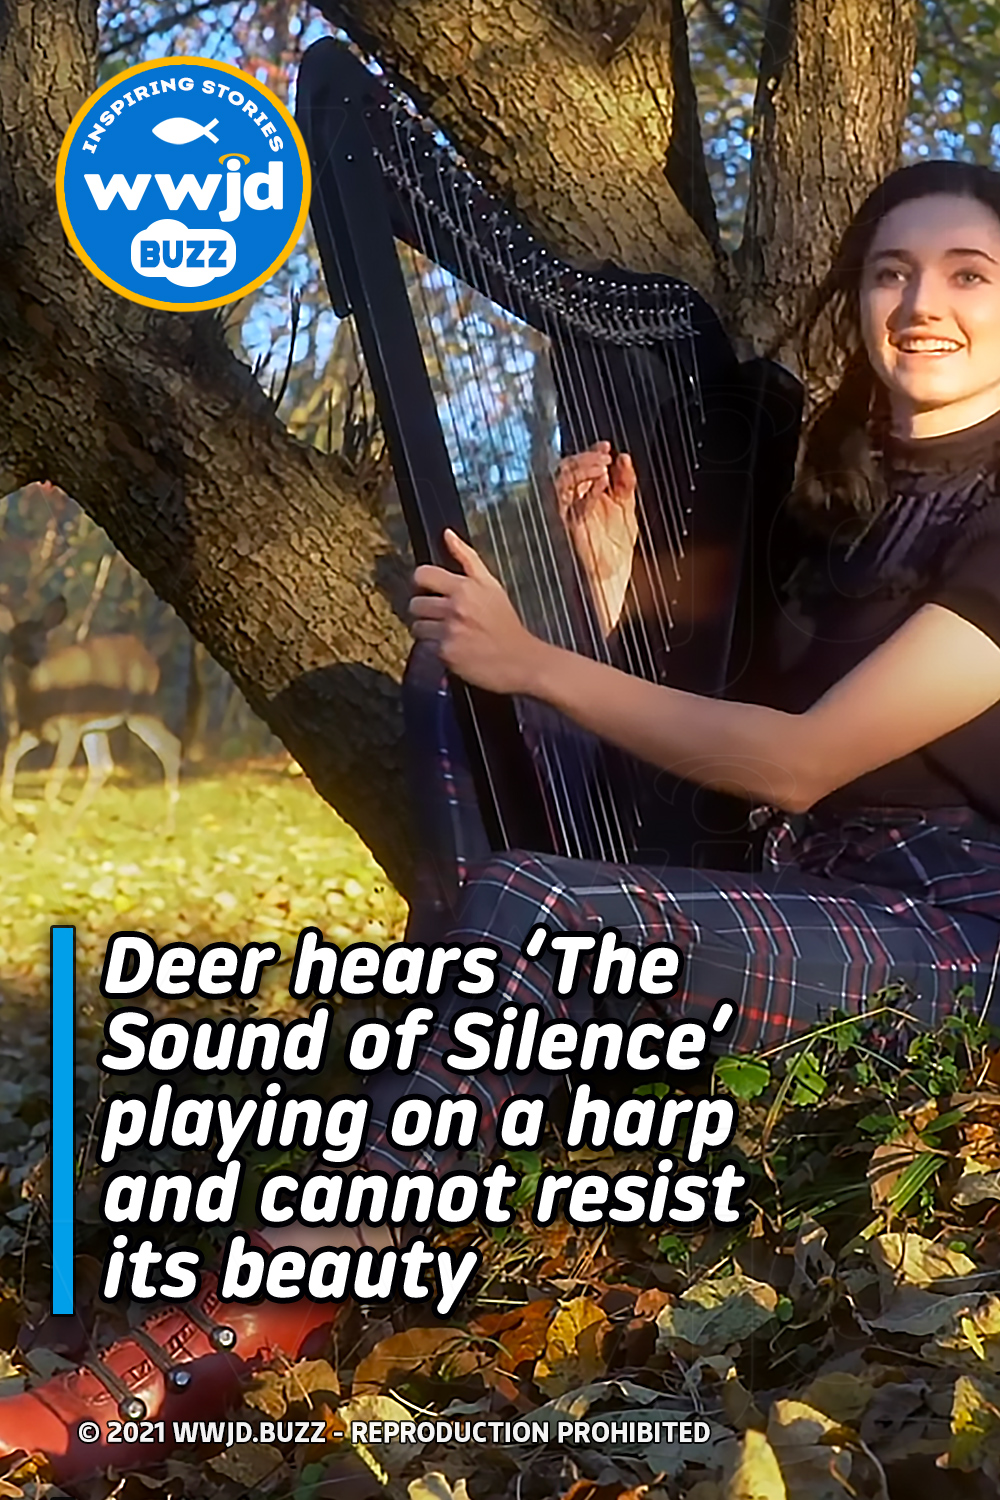 Deer hears ‘The Sound of Silence’ playing on a harp and cannot resist its beauty